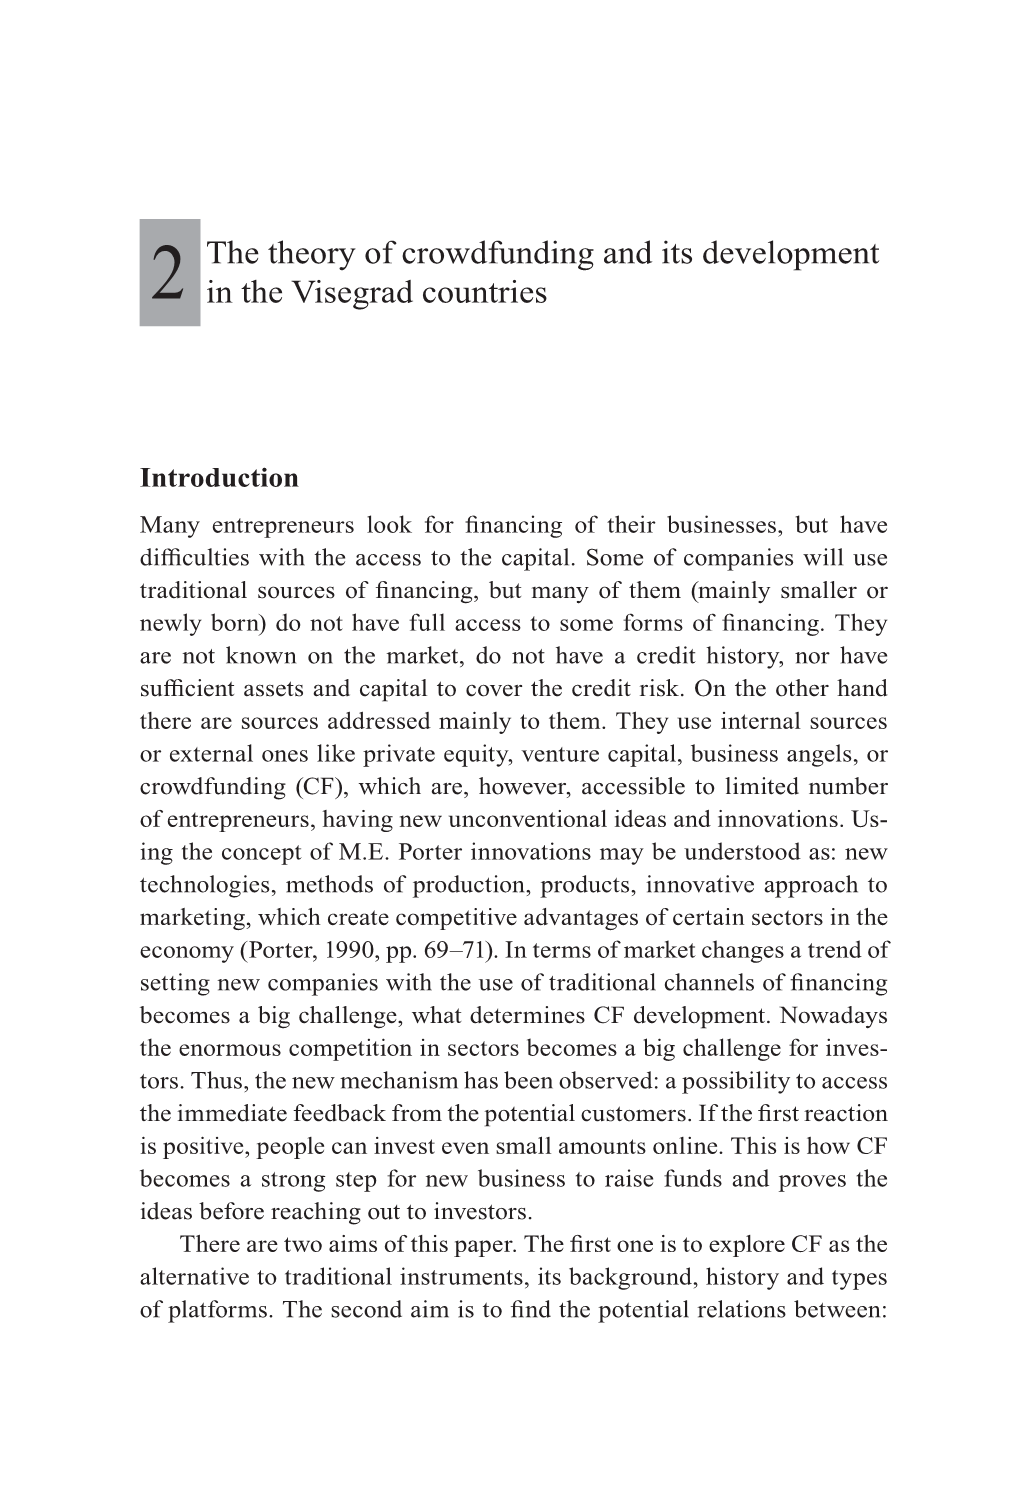 The Theory of Crowdfunding and Its Development in the Visegrad Countries